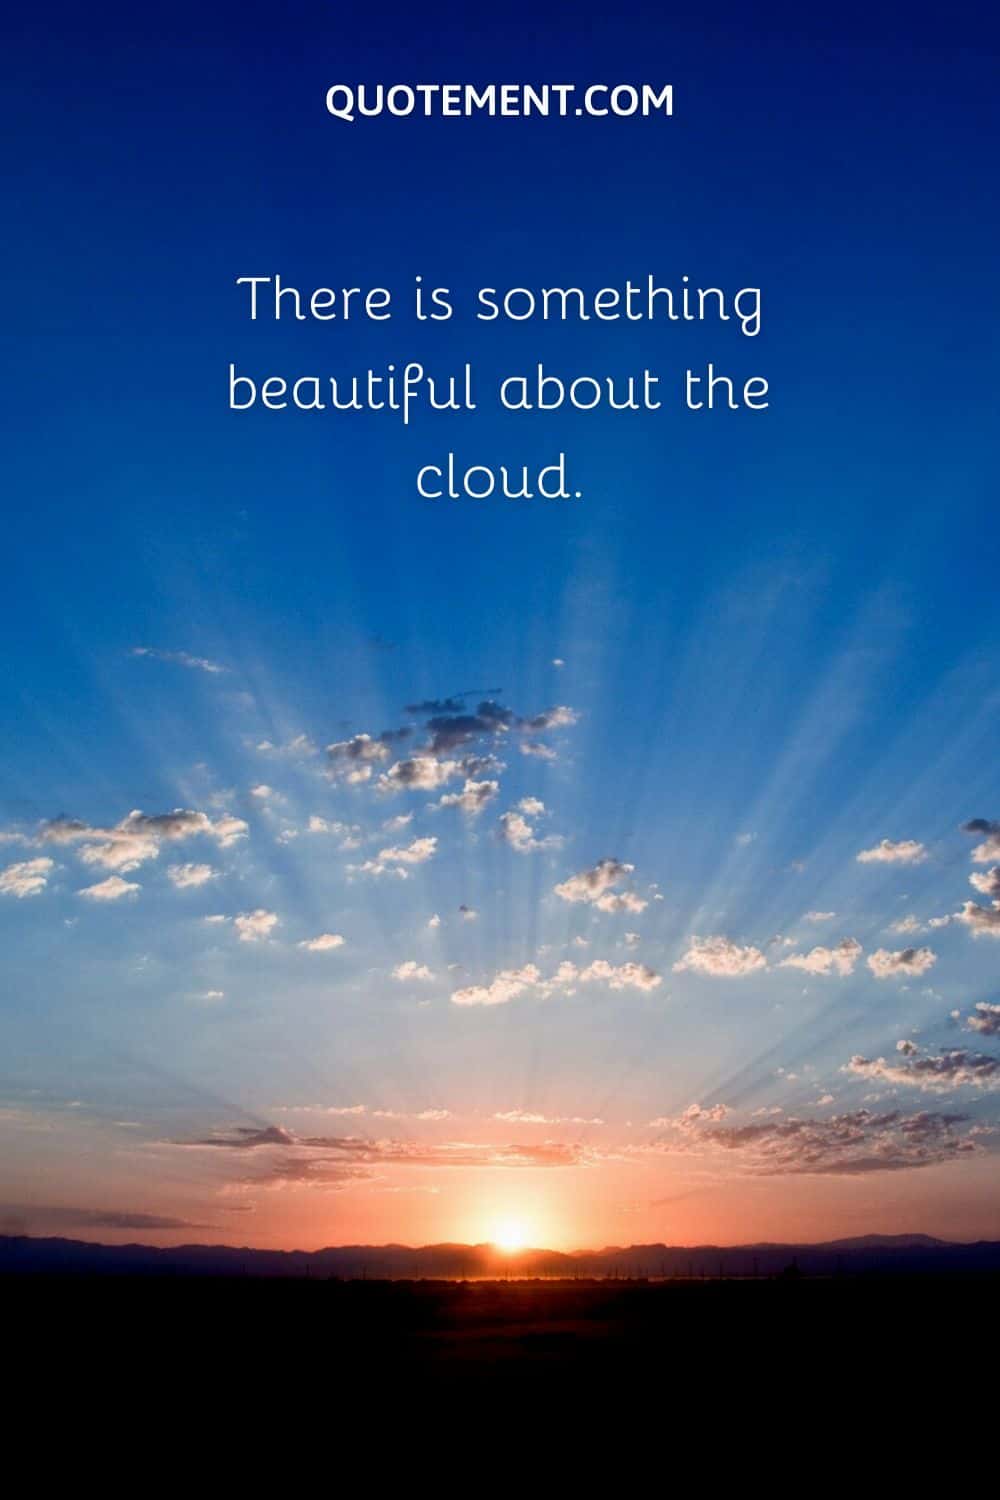 There is something beautiful about the cloud.